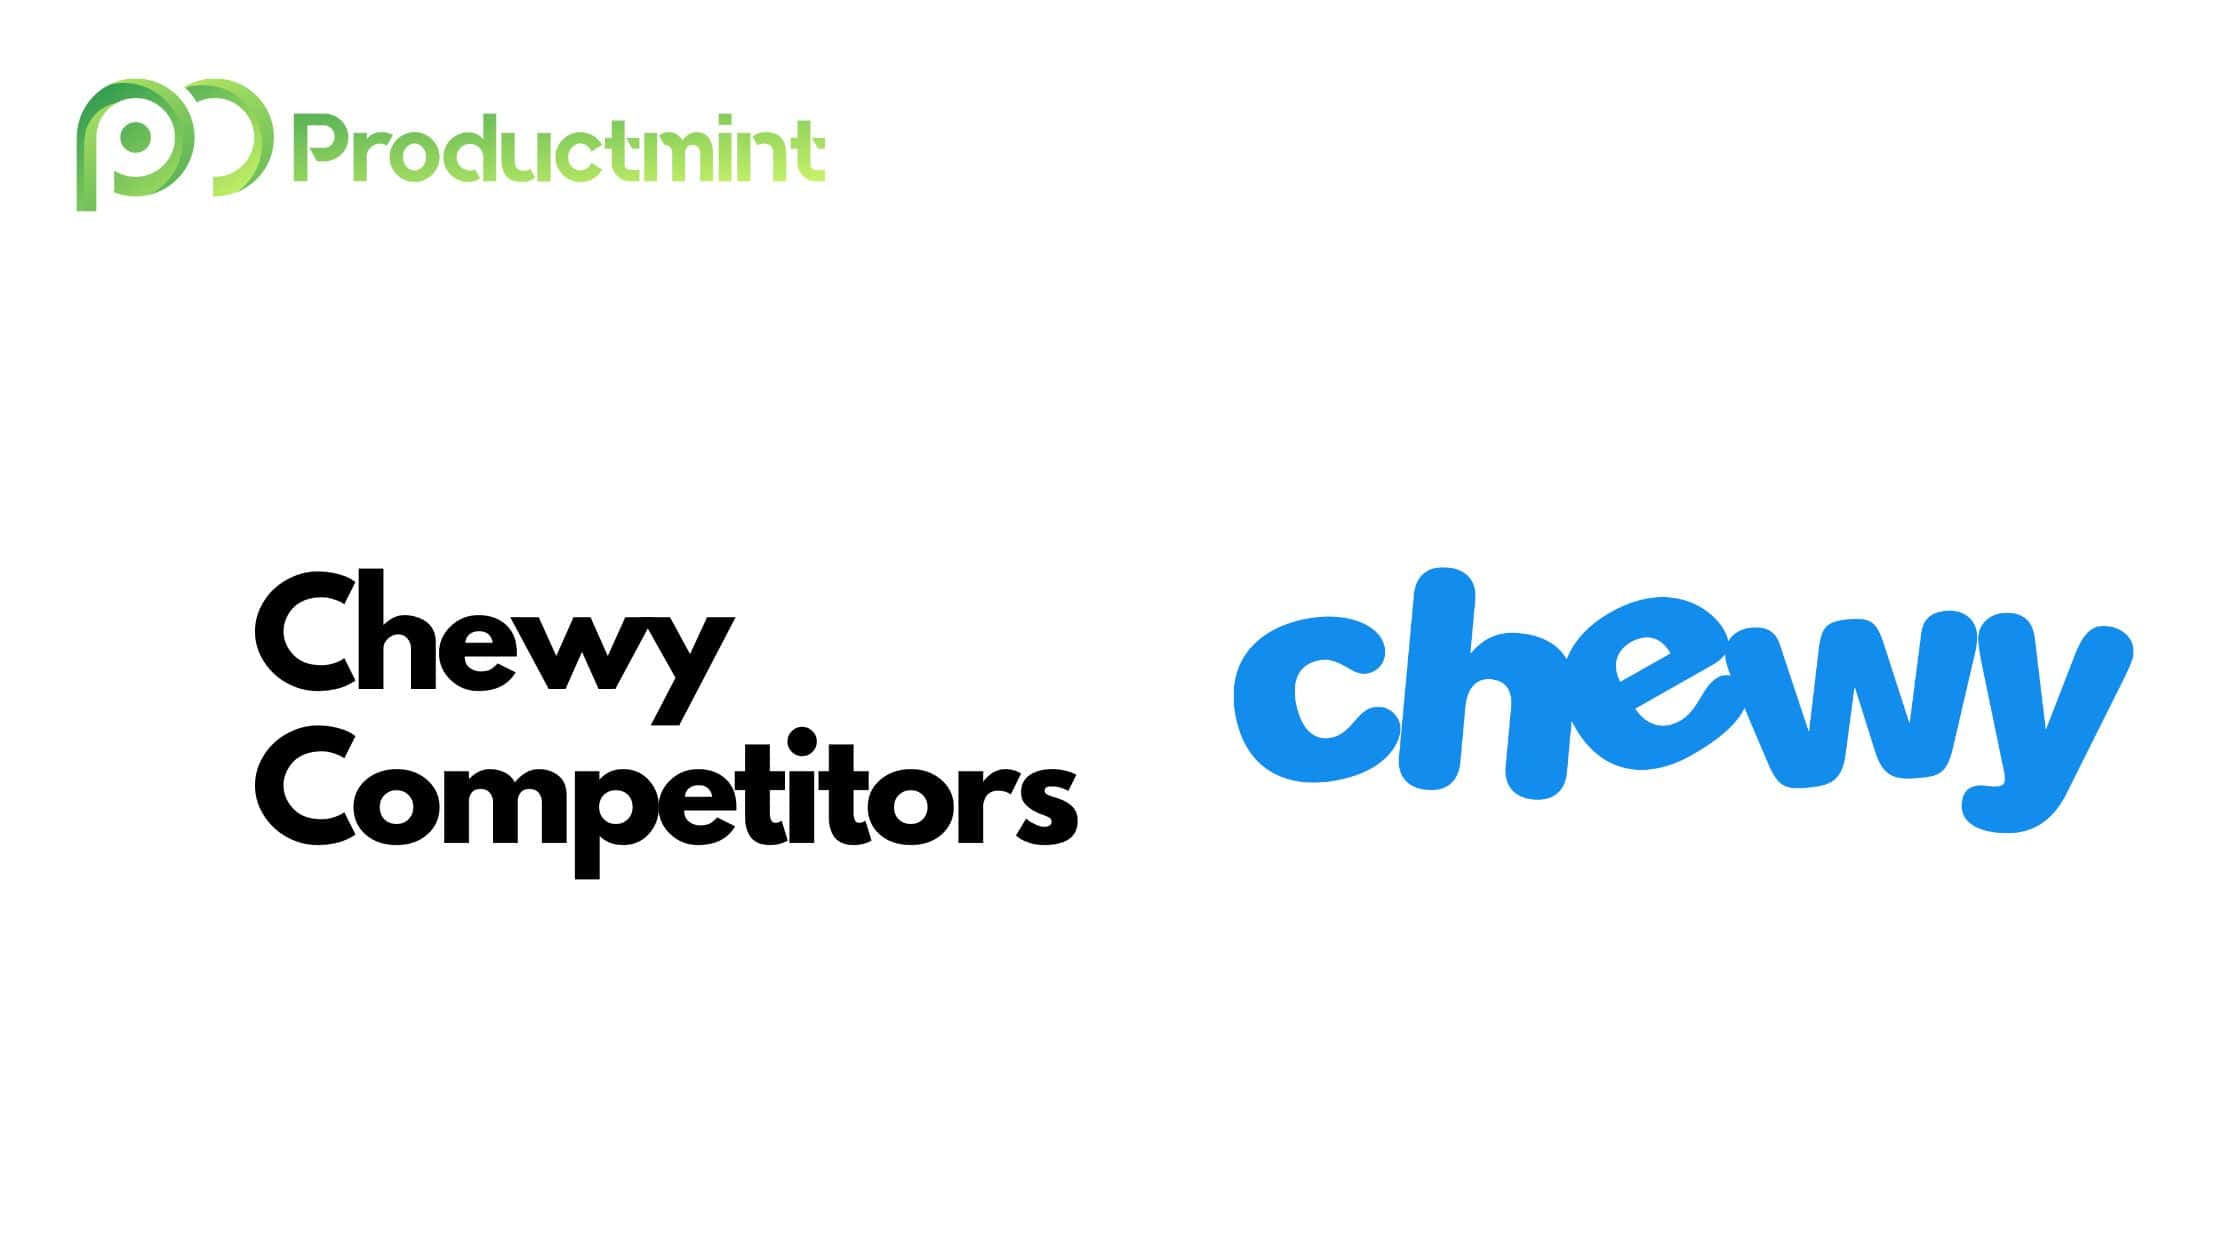 Chewy Competitors